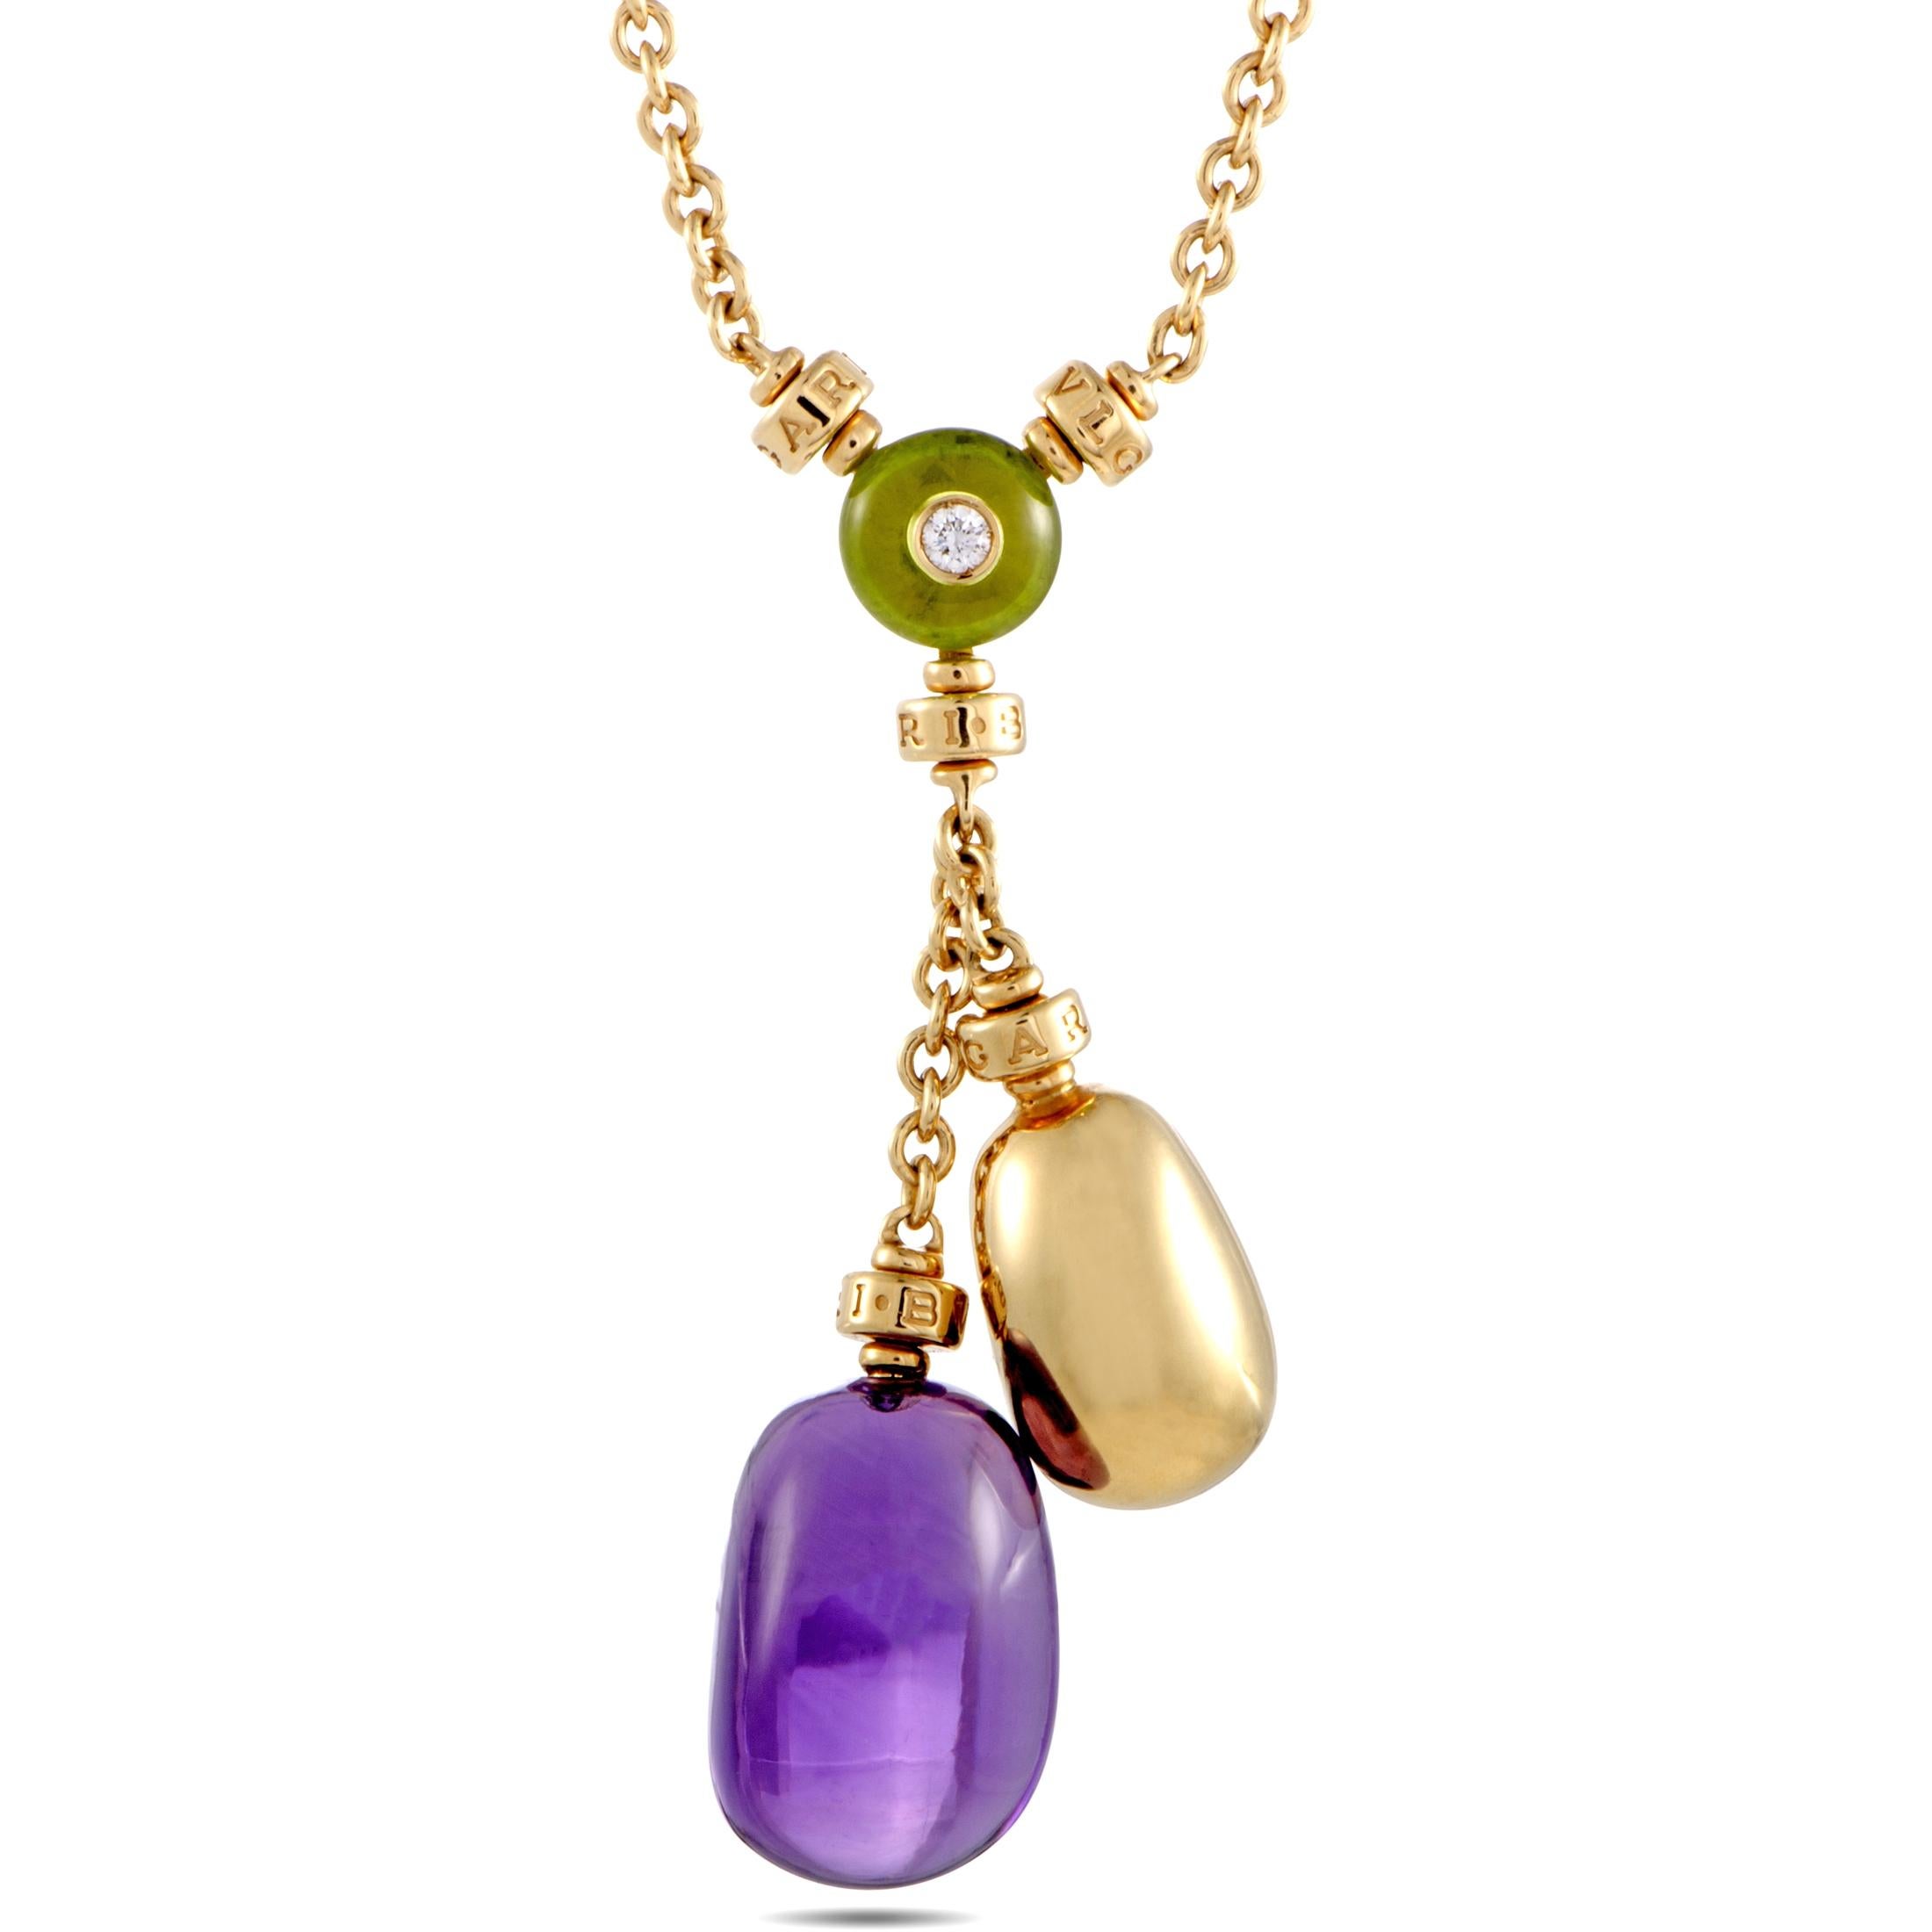 Add an attractive colorful touch to your ensembles with this gorgeous Bvlgari necklace that compels with its elegant design and eye-catching décor. The necklace is wonderfully made of 18K yellow gold and it is embellished with enticing gems.
